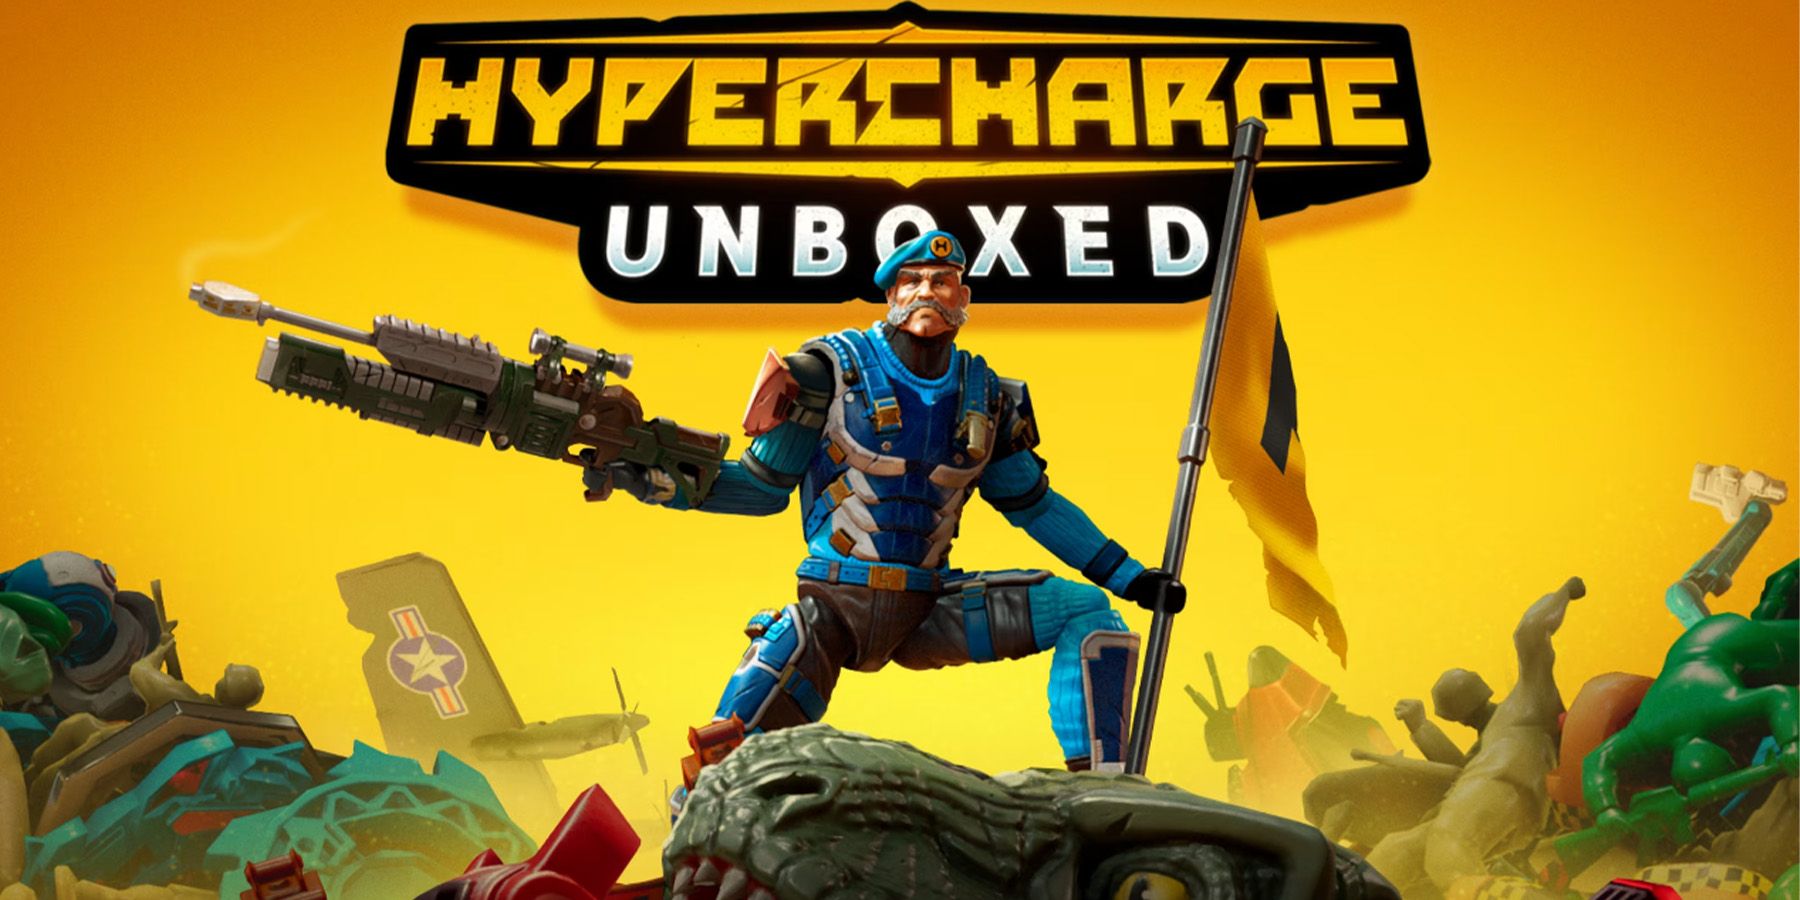 Hypercharge Unboxed artwork